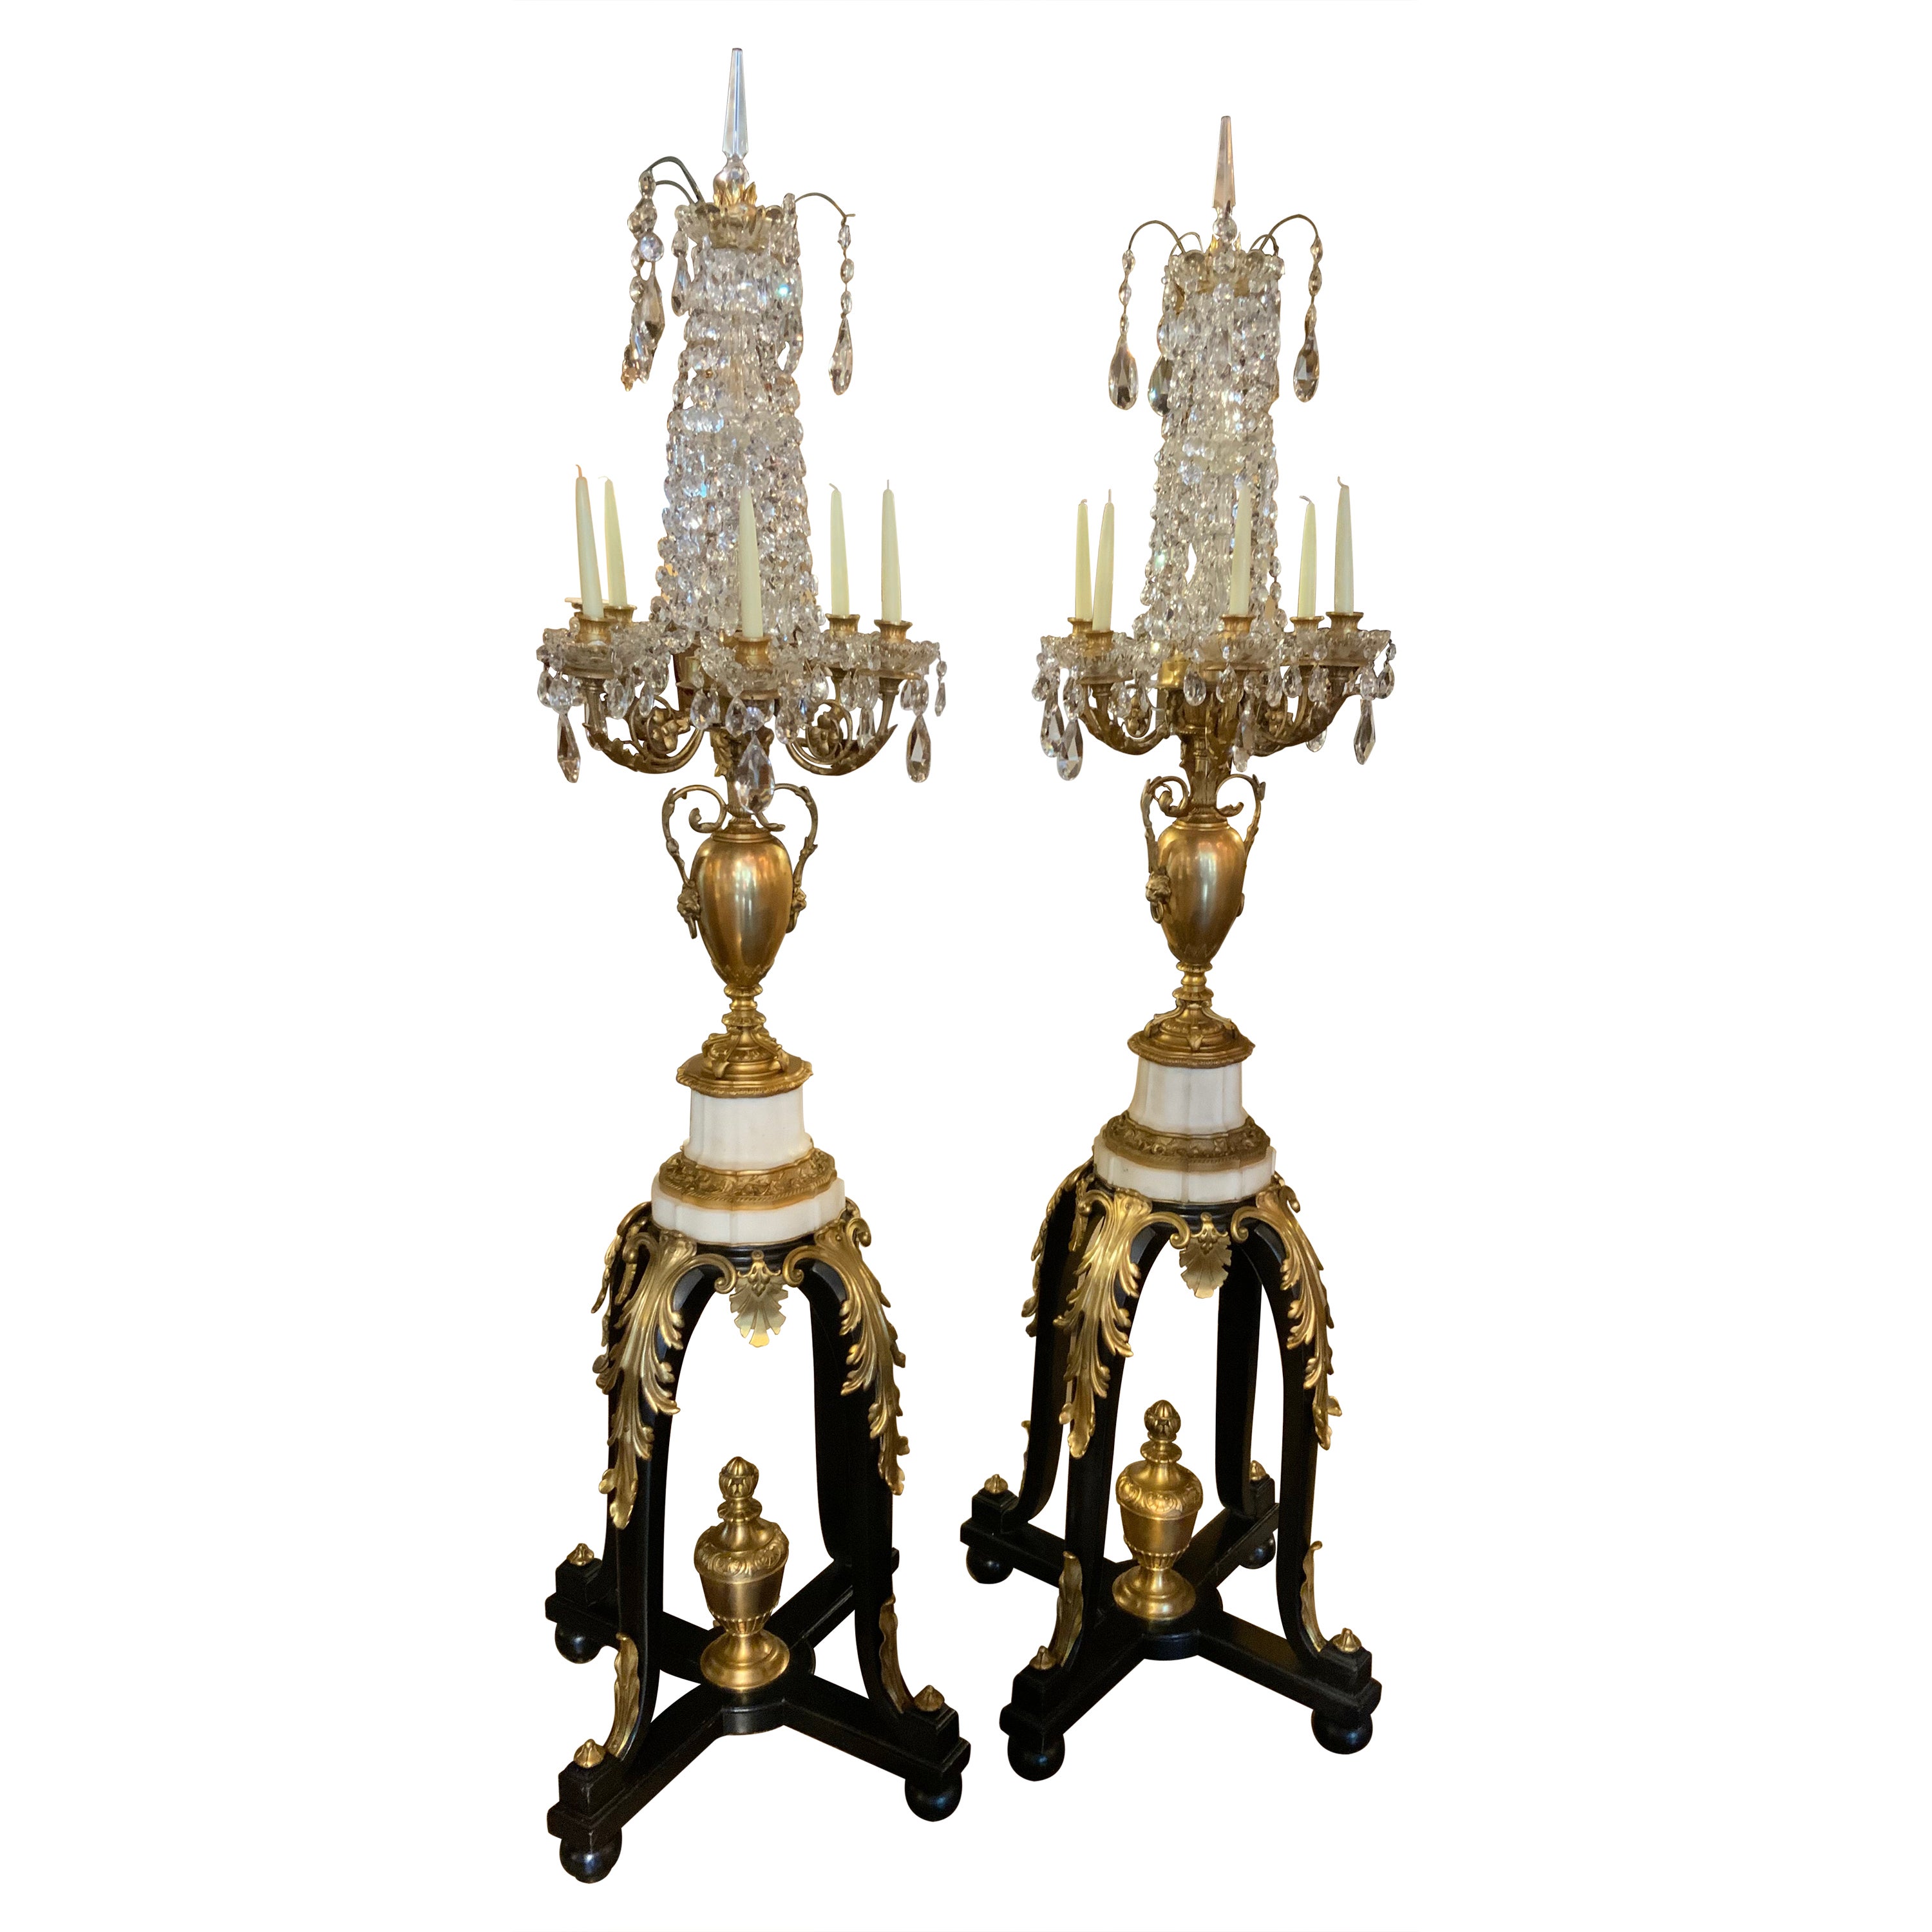 Pair of French 19th C. Torchiers, Gilt Bronze Marble and Crystal